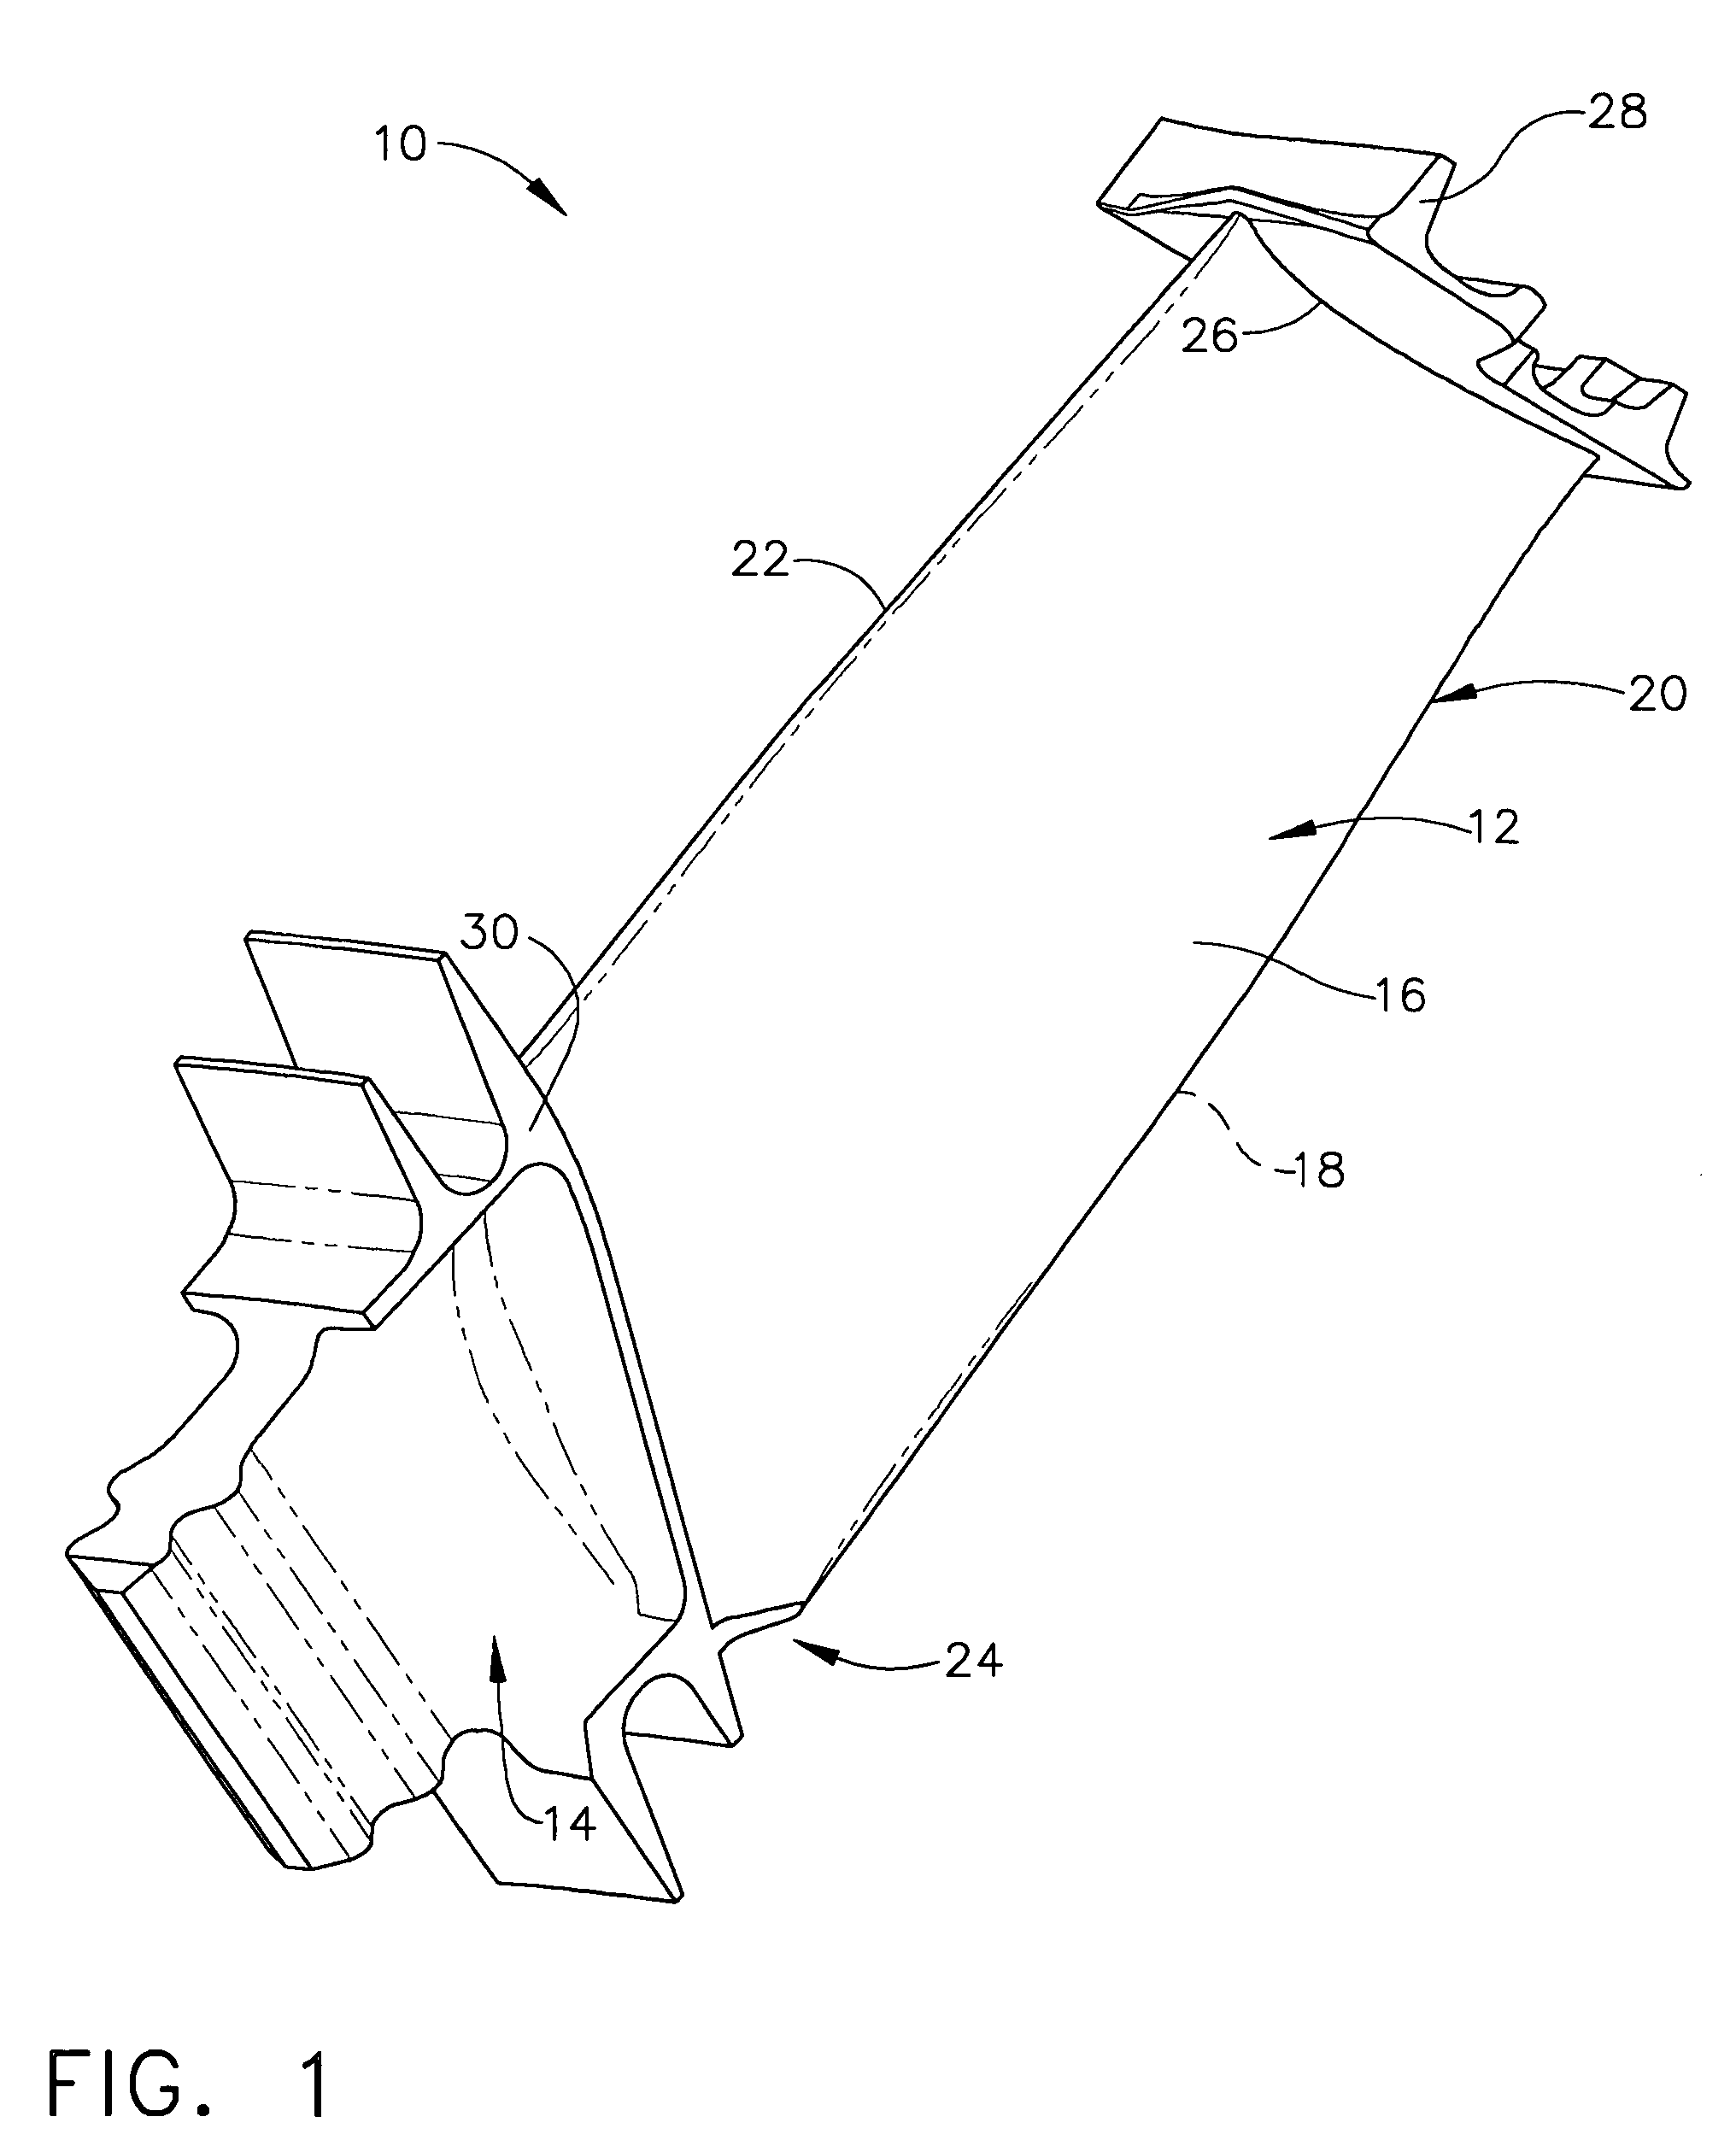 Methods and apparatus for manufacturing components